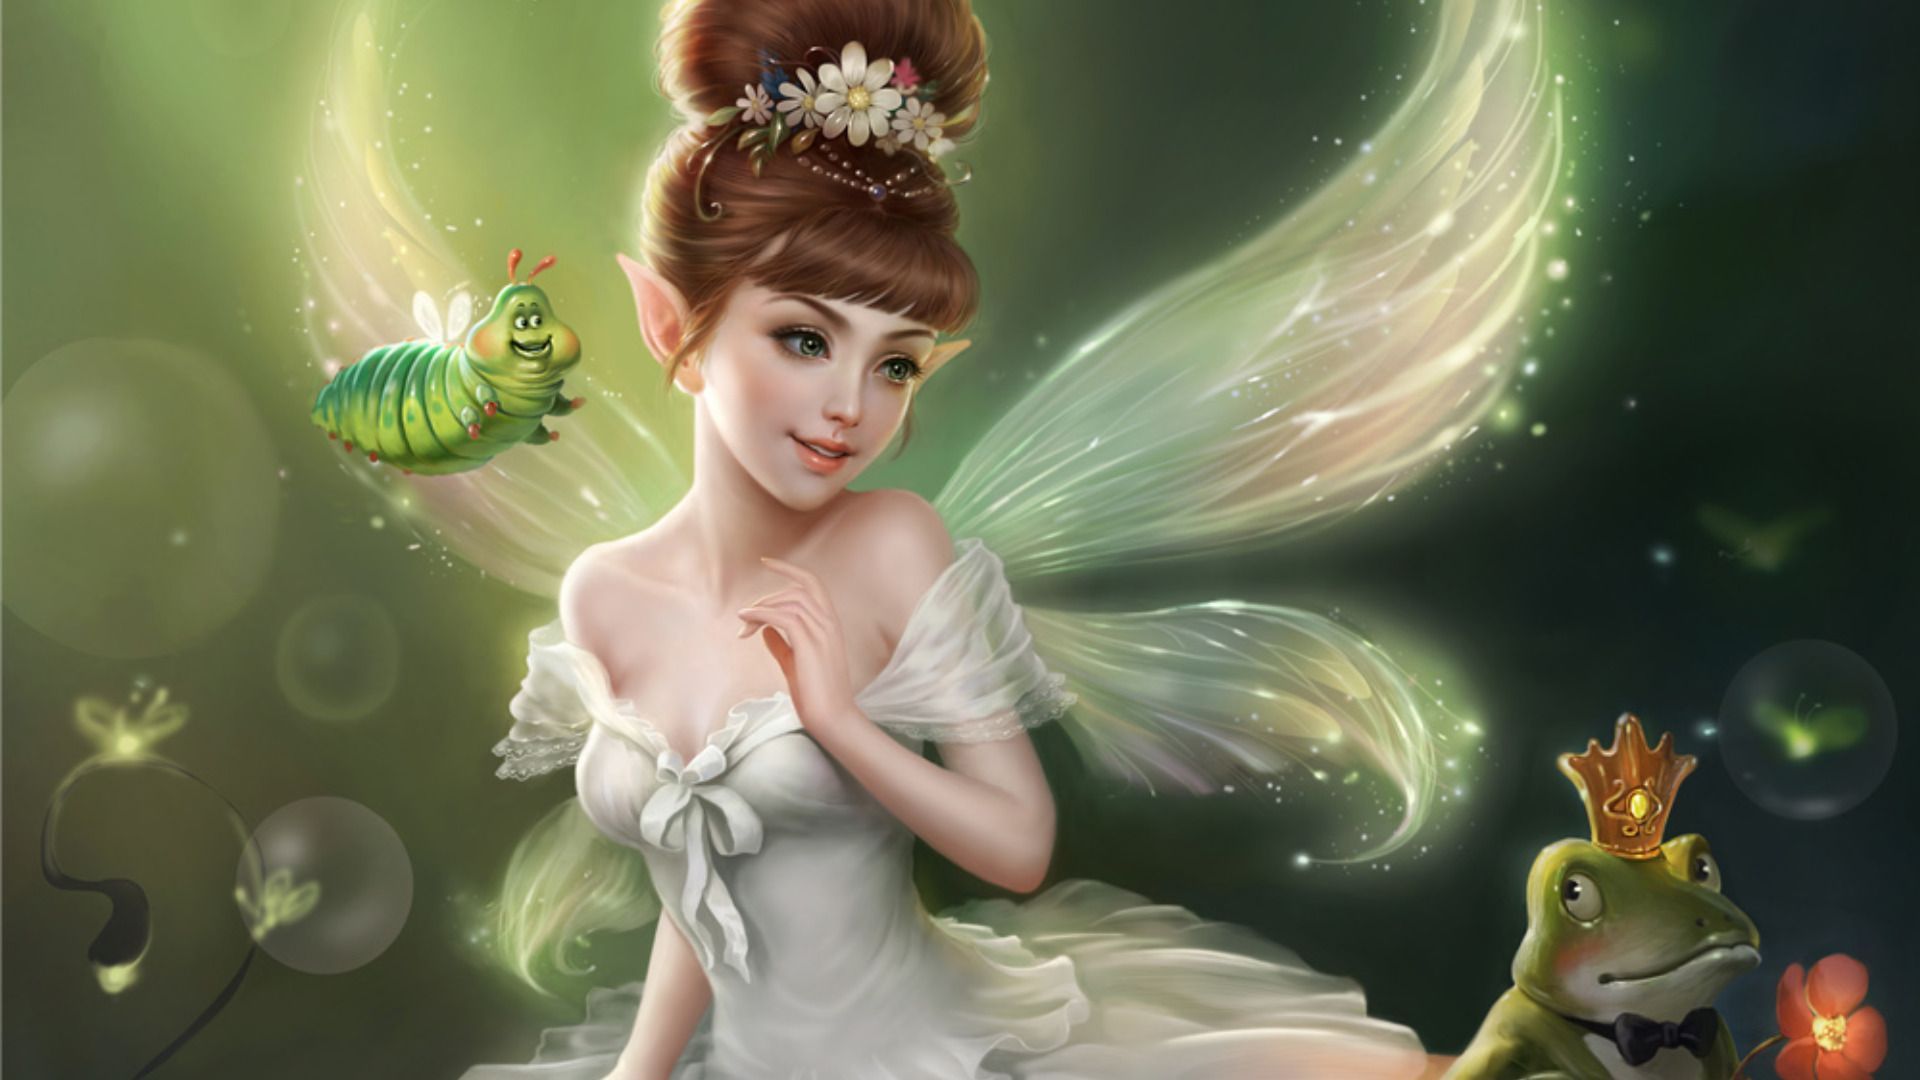 Fairy Wallpapers For Computer - Wallpaper Cave